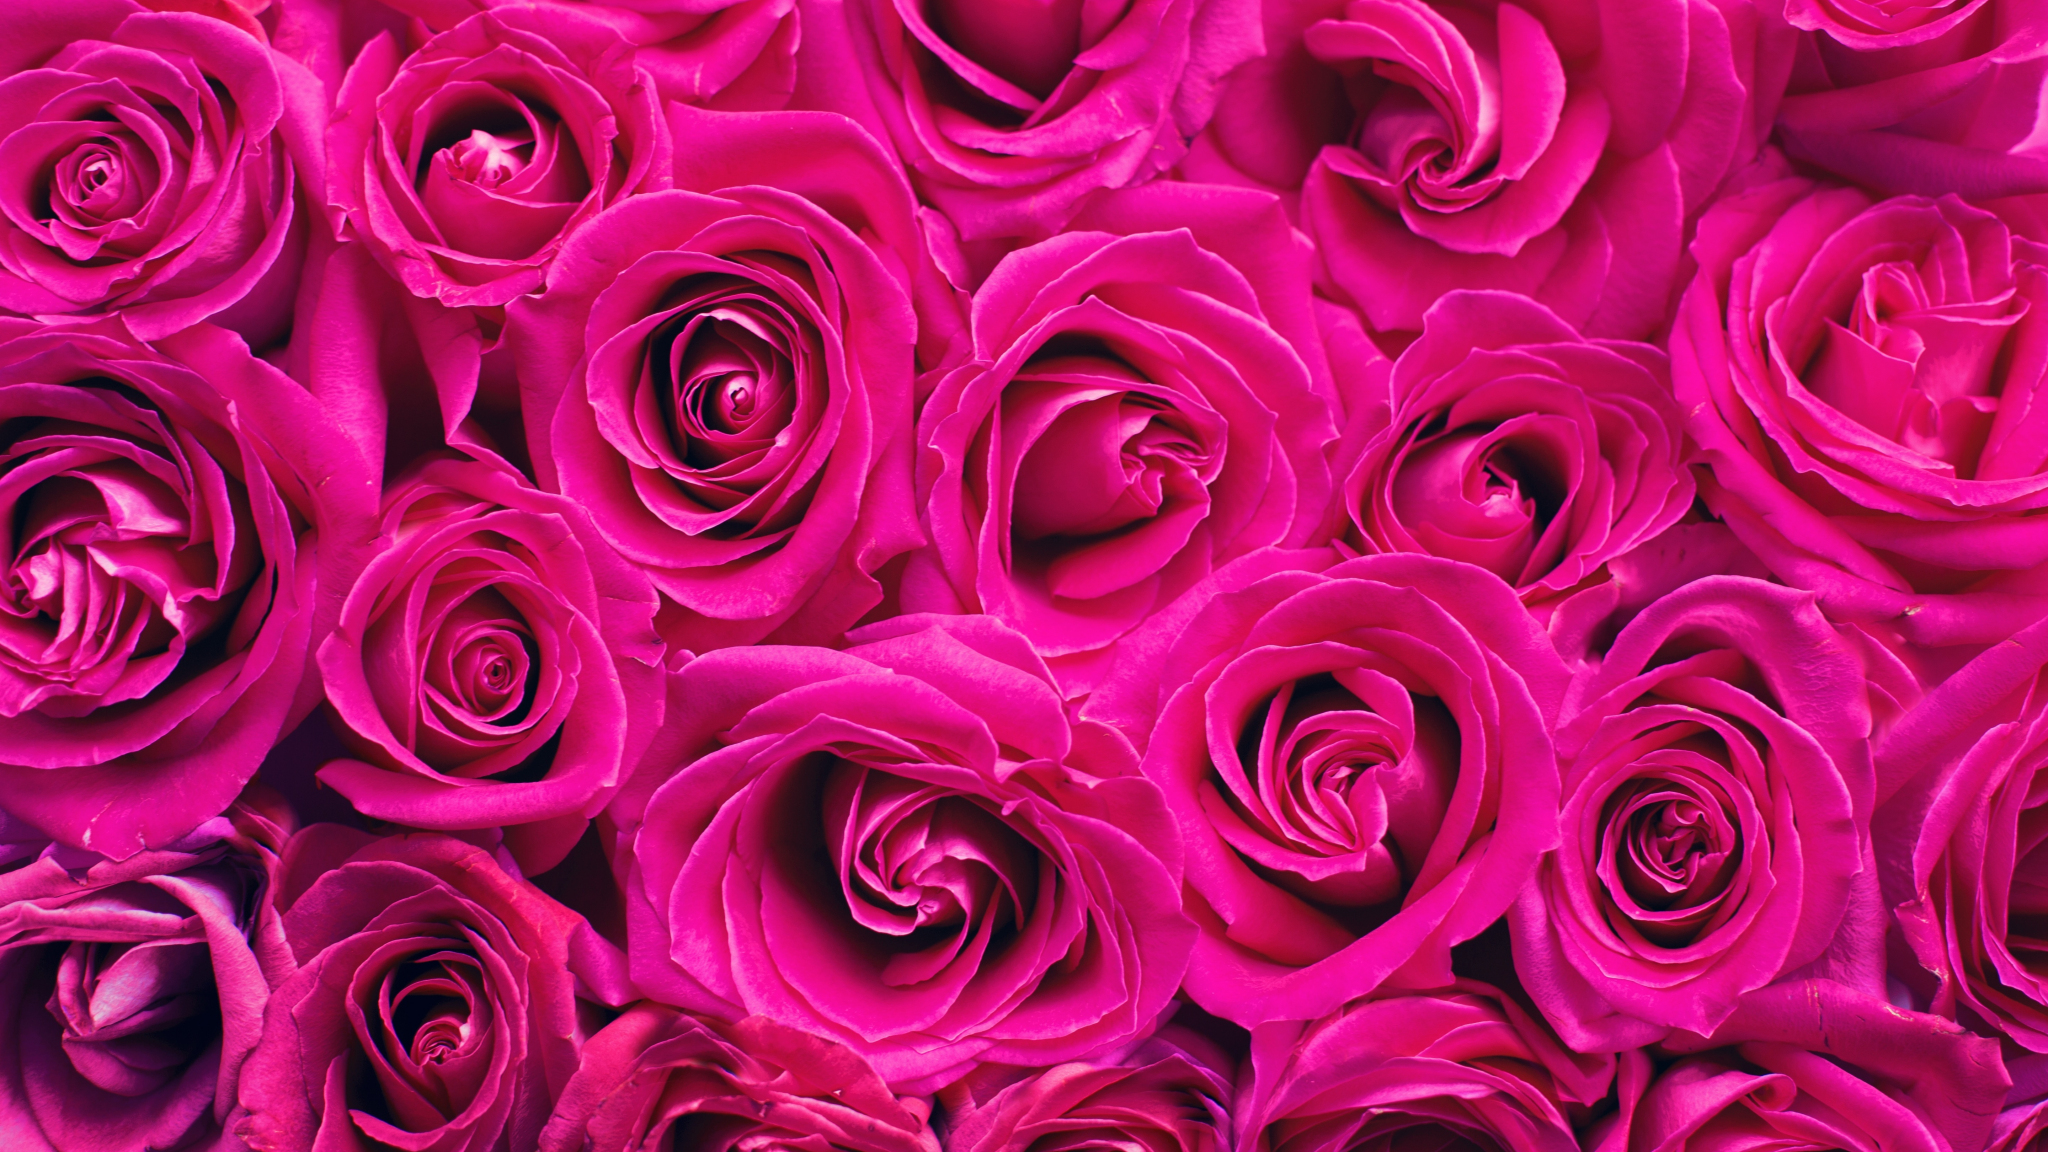 Download 2048x1152 Wallpaper Pink Roses Decorations Bouquet Dual Wide Widescreen 2048x1152 Hd Image Background 9918